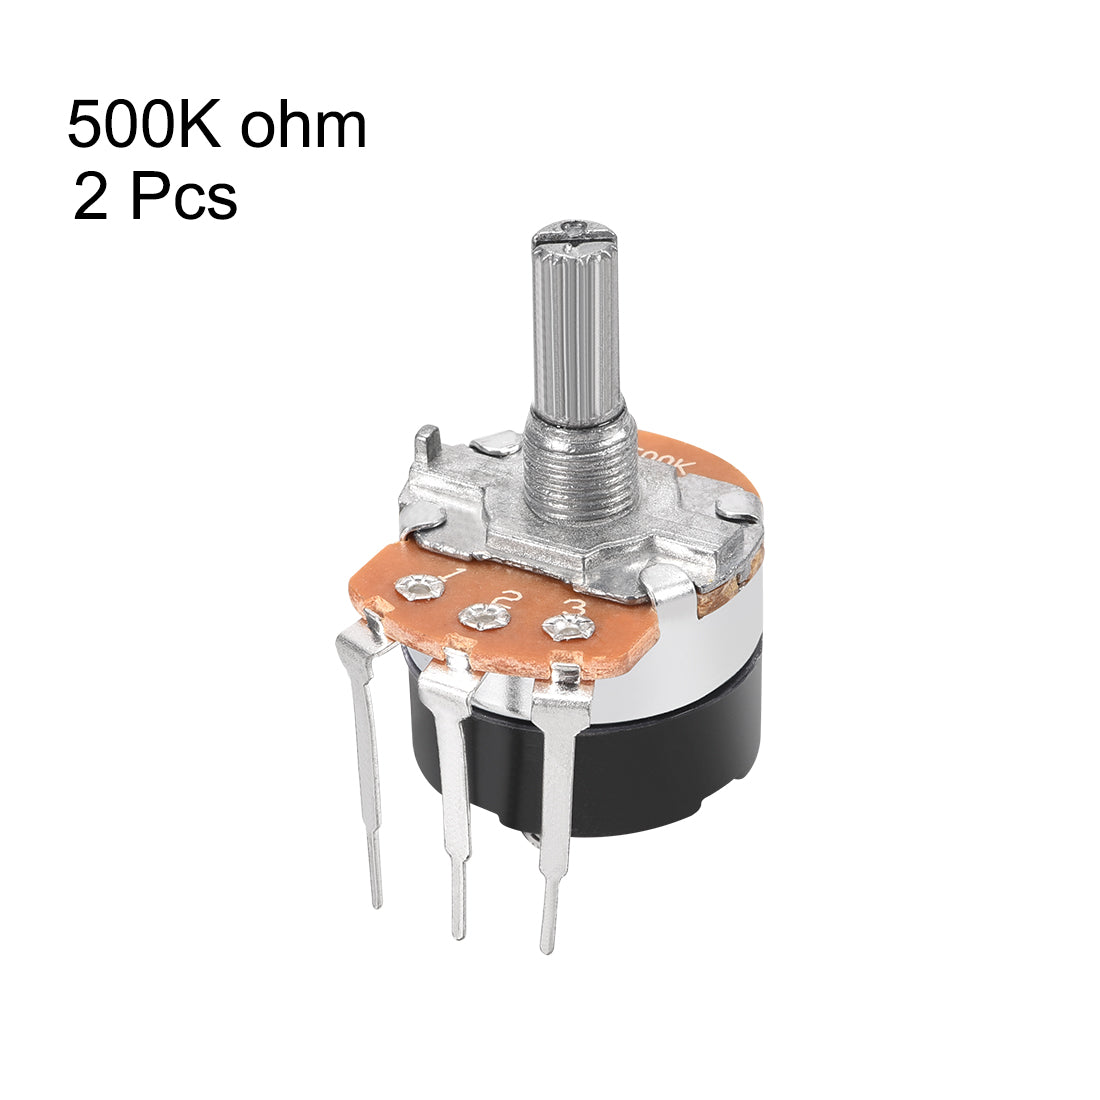 uxcell Uxcell WH138 Potentiometer with Switch B500K Ohm Variable Resistors Single Turn Rotary Carbon Film Taper 2pcs